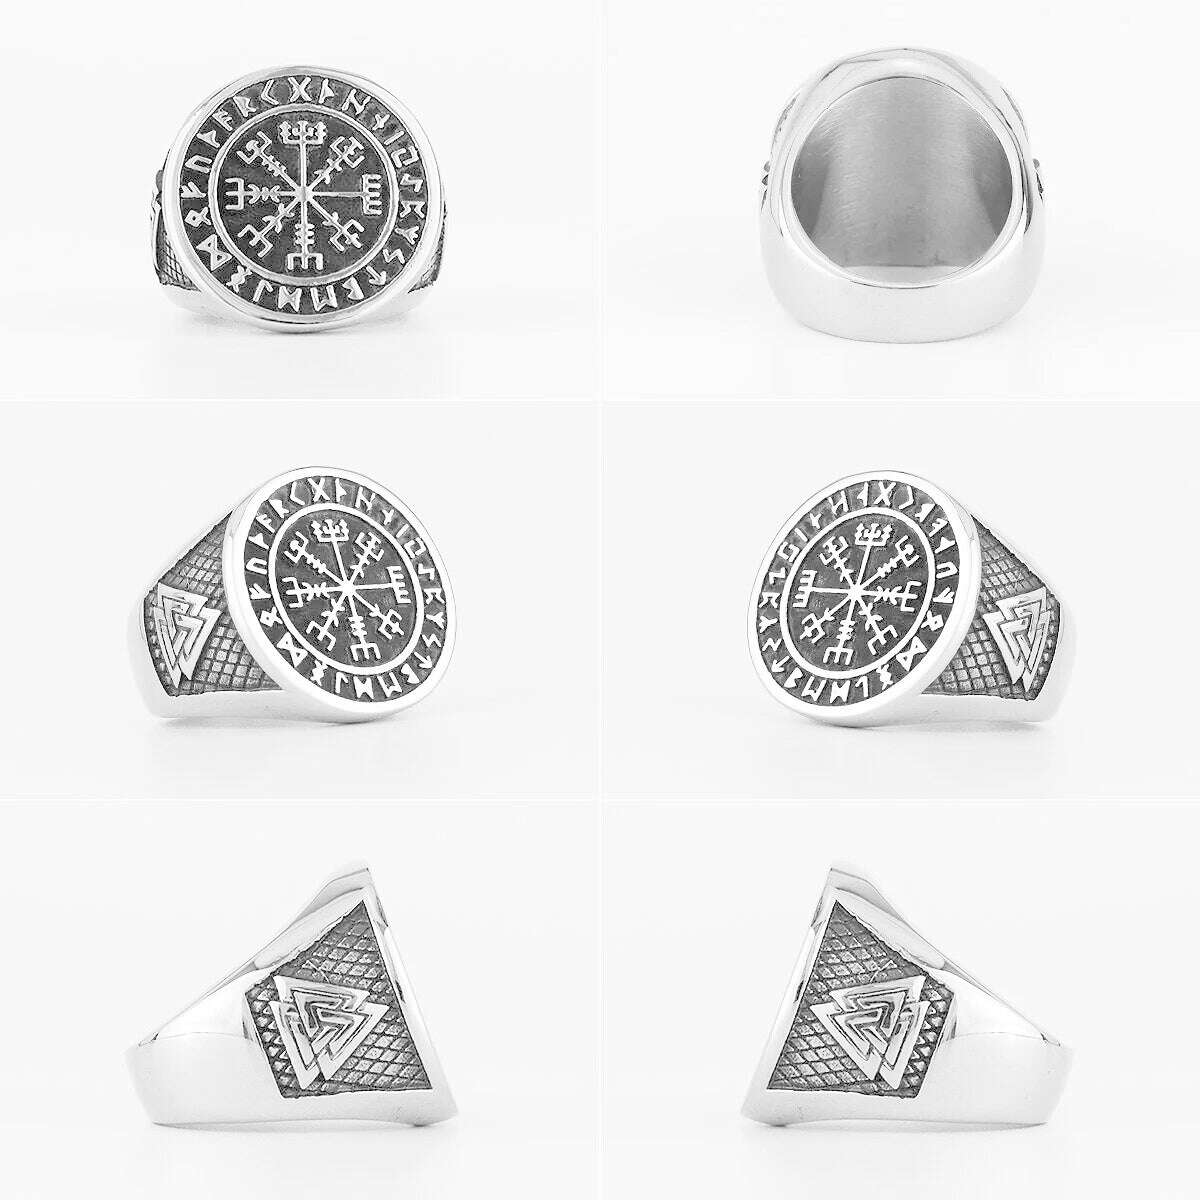 KIMLUD, Myth Odin Triangle Symbol Viking Stainless Steel Mens Rings Vintage Charm for Male Boyfriend Jewelry Creativity Gift Wholesale, KIMLUD Women's Clothes